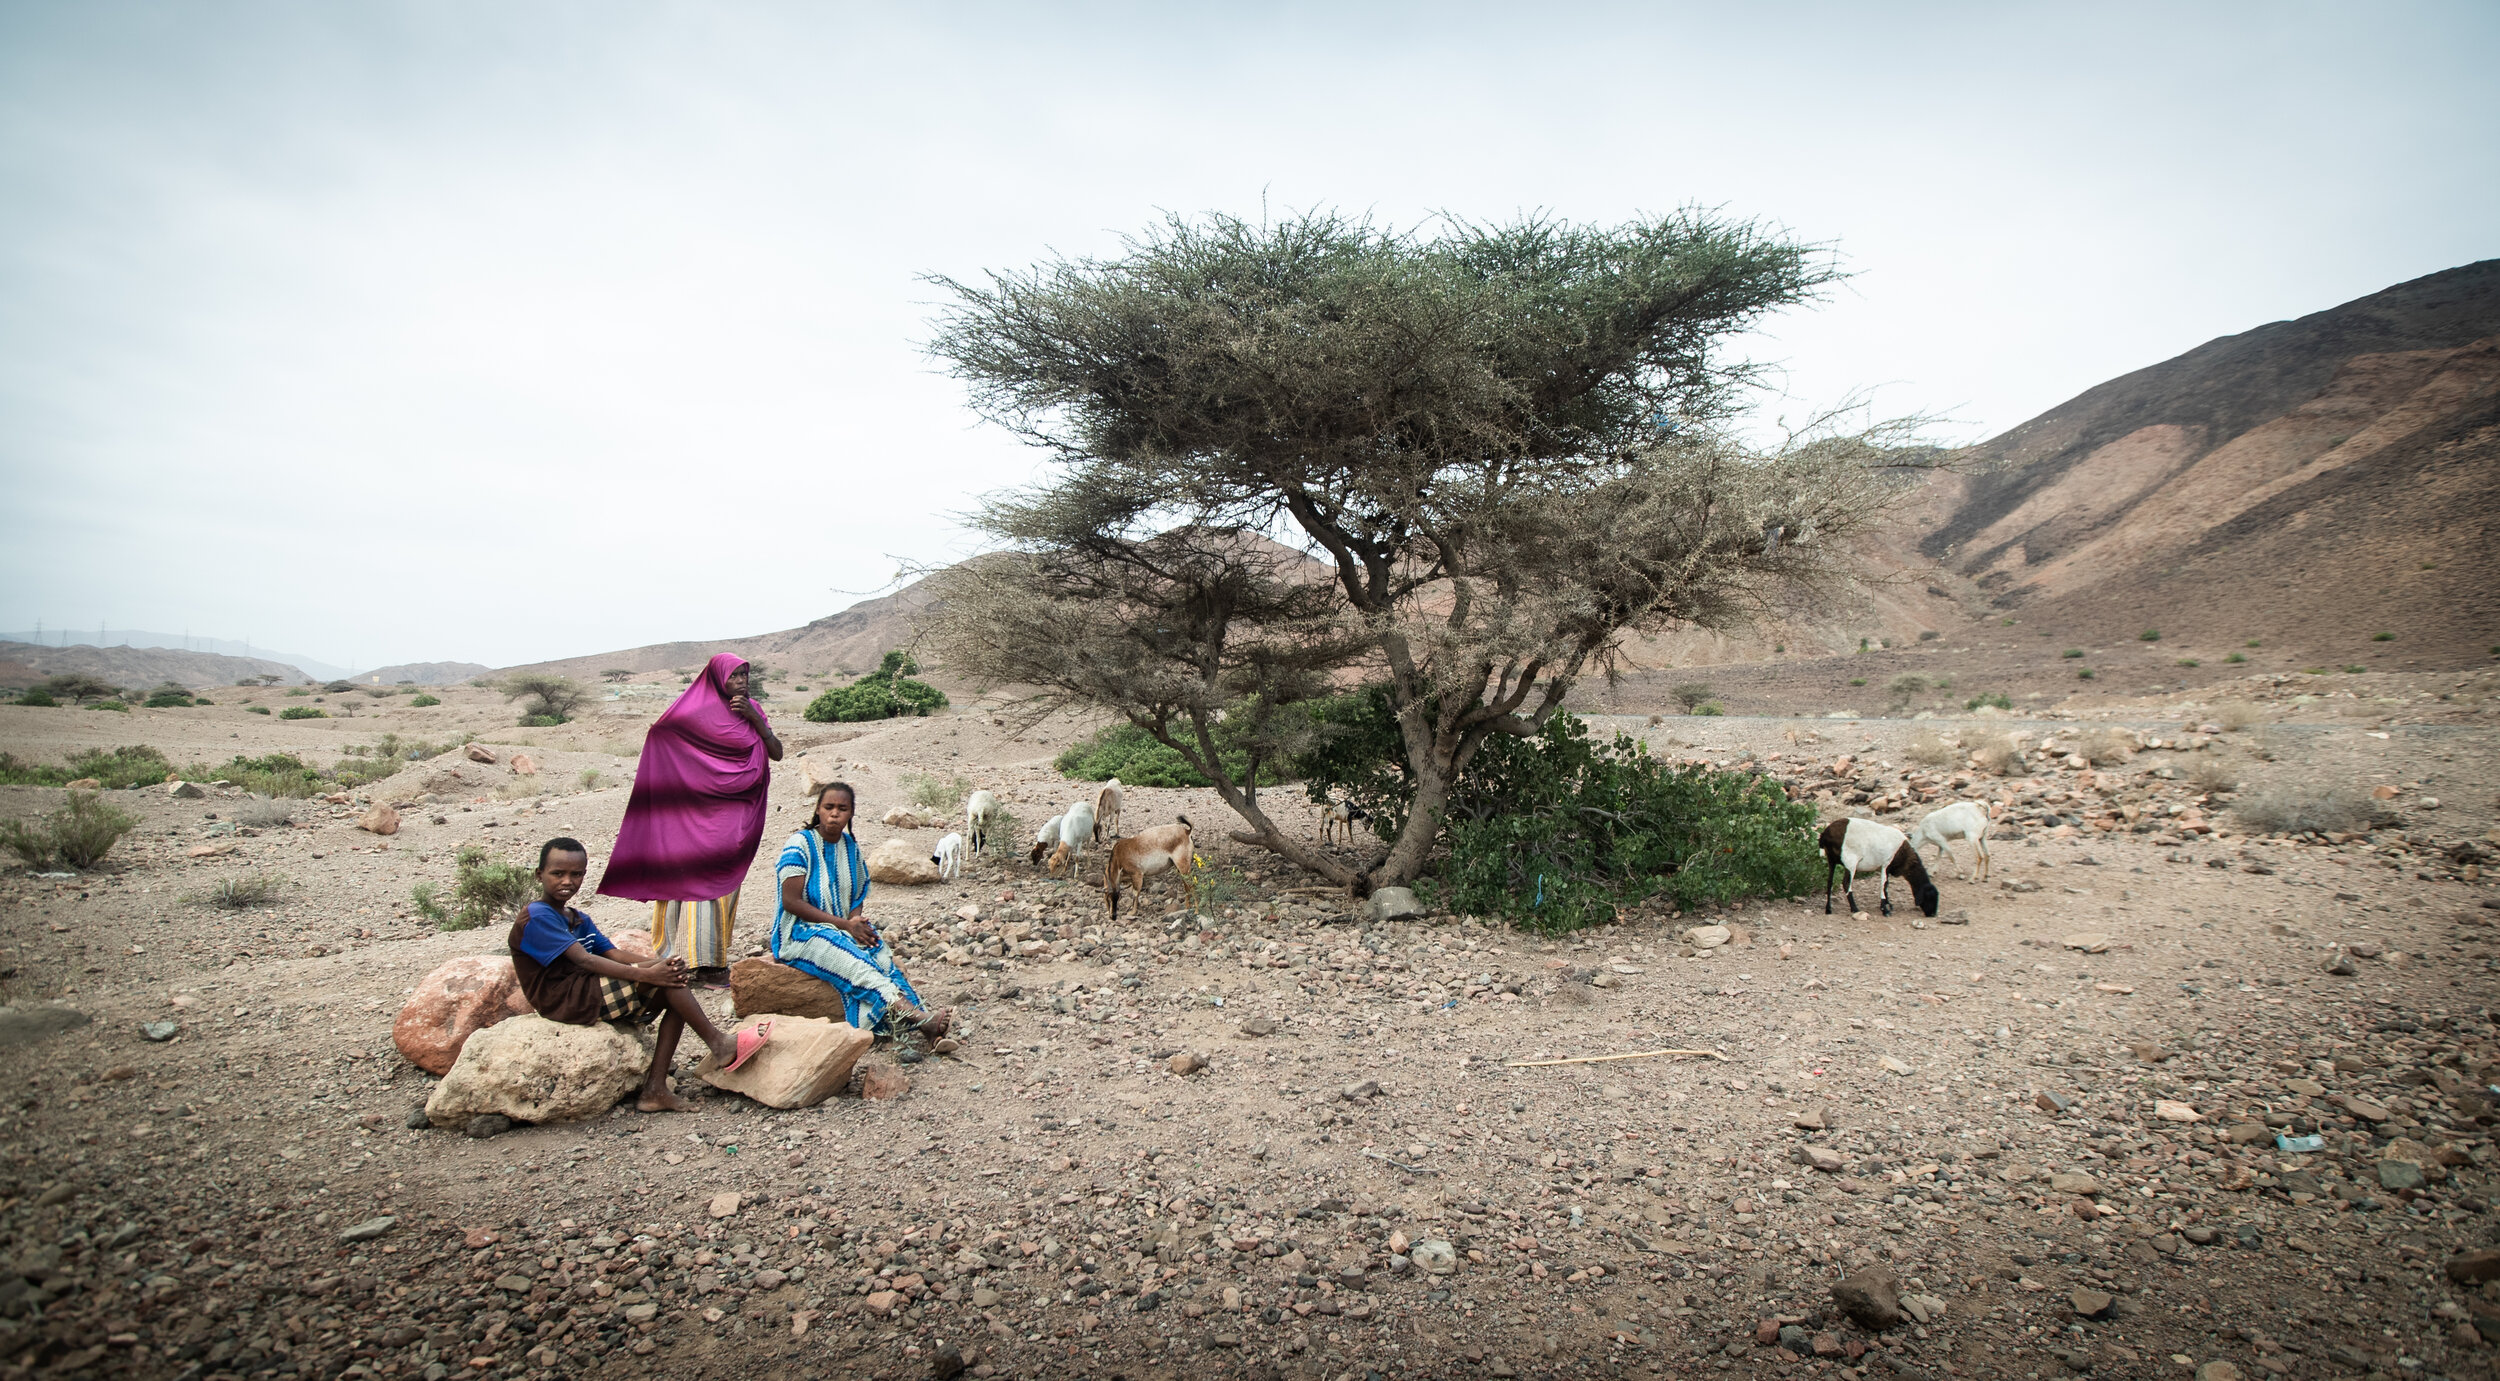  Moumina Idris Wabri with her children while their cattle is grazing.  organizations, like UNDP Djibouti, are providing families like Moumina Idriss Wabri’s, in Ombokta, with seeds, farming equipment, water pipes and trainings on farming and on how t